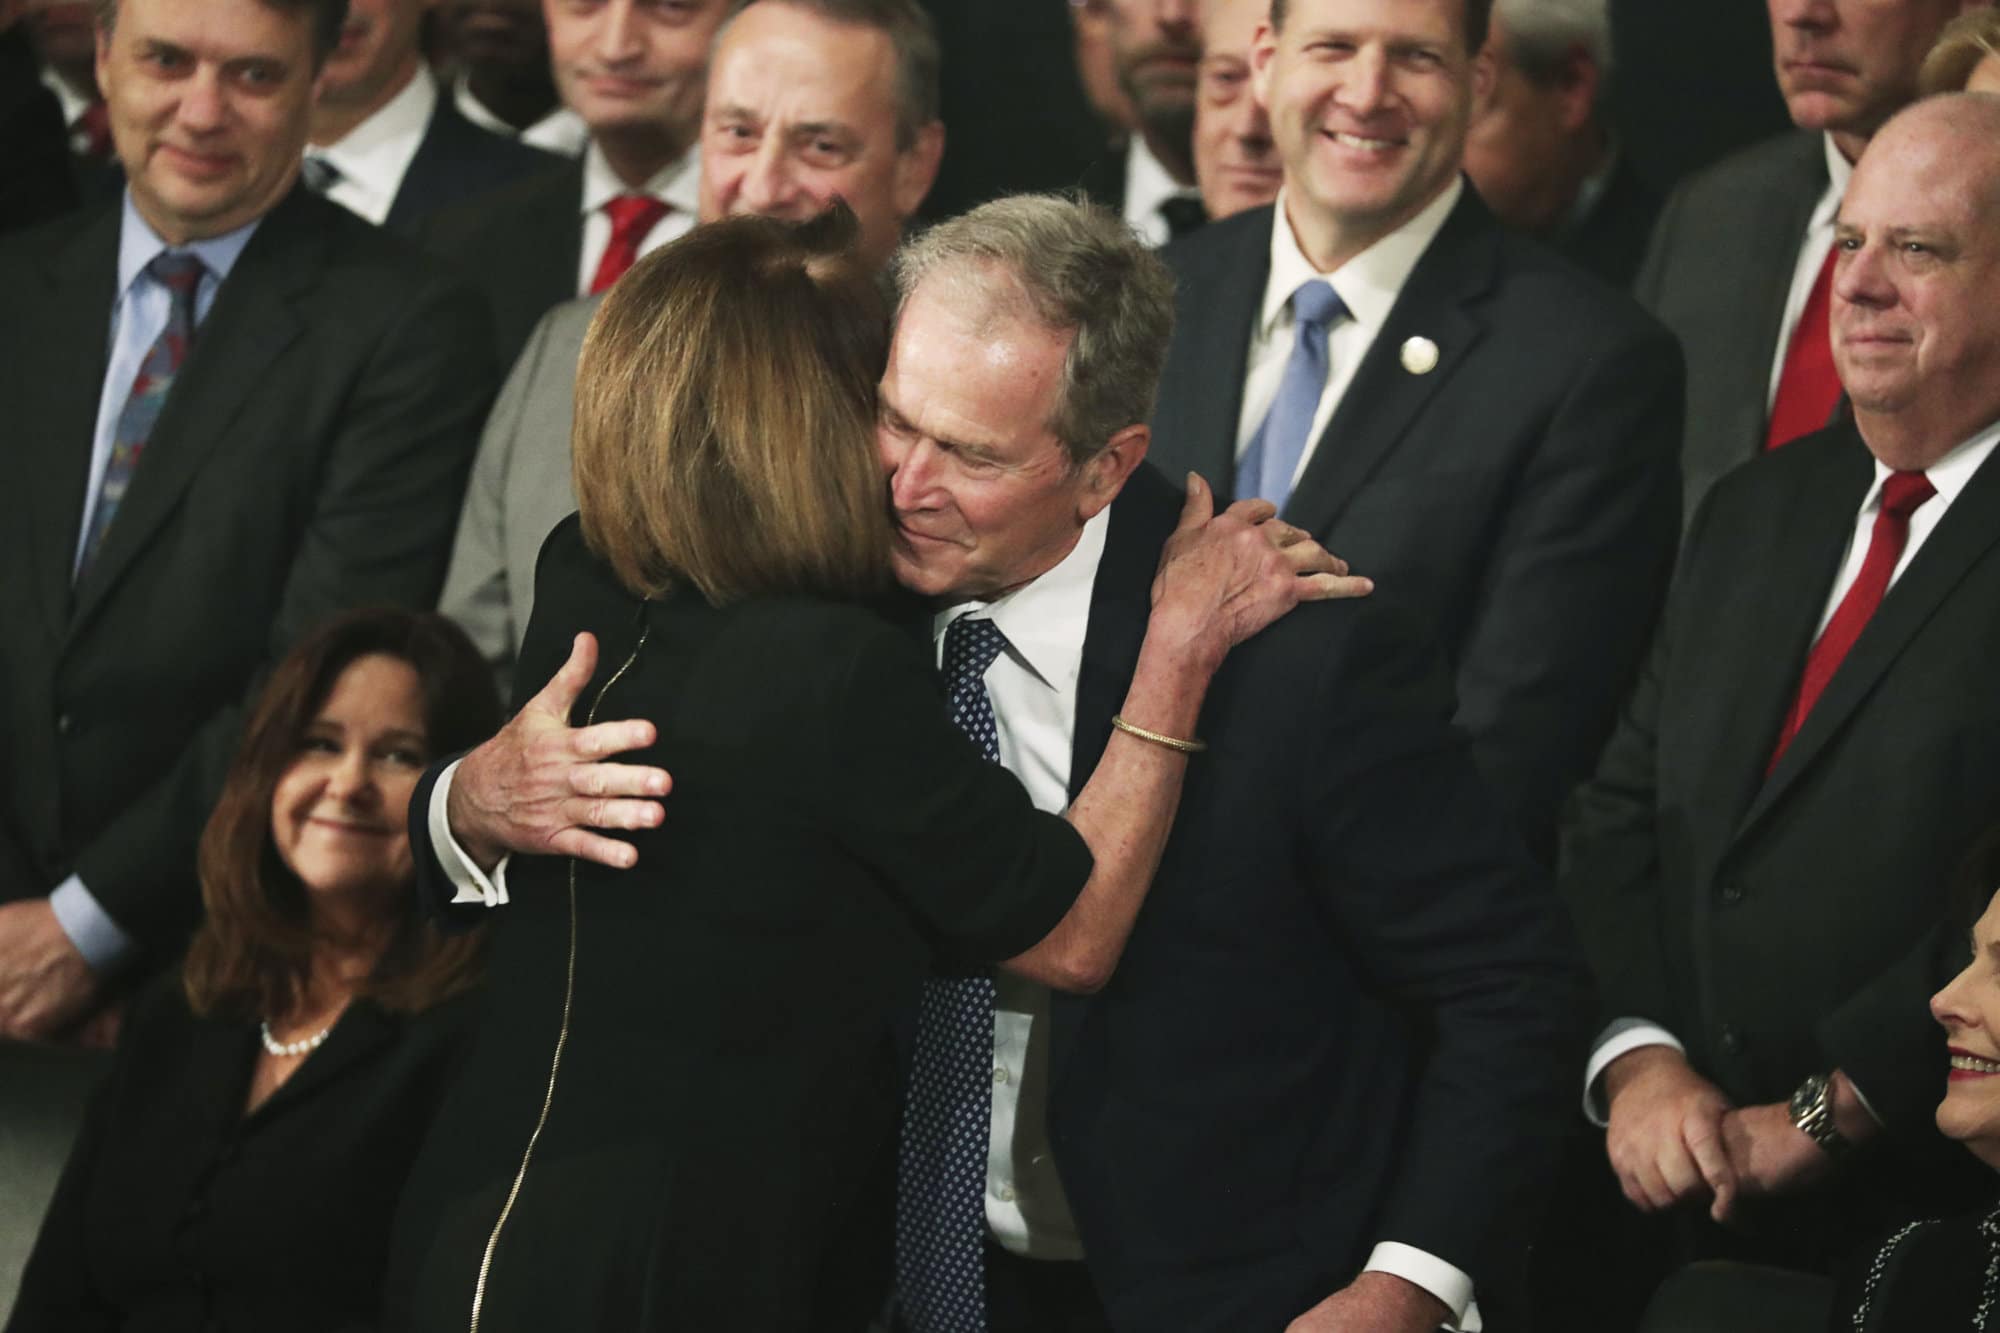 Former President George W. Bush is embraced by Democratic House Leader Nancy Pelosi, D-Calif., during the arrival of the casket of former President George H.W. Bush into the Capitol in Washington, Monday, Dec. 3, 2018. (Jonathan Ernst/Pool Photo via AP)